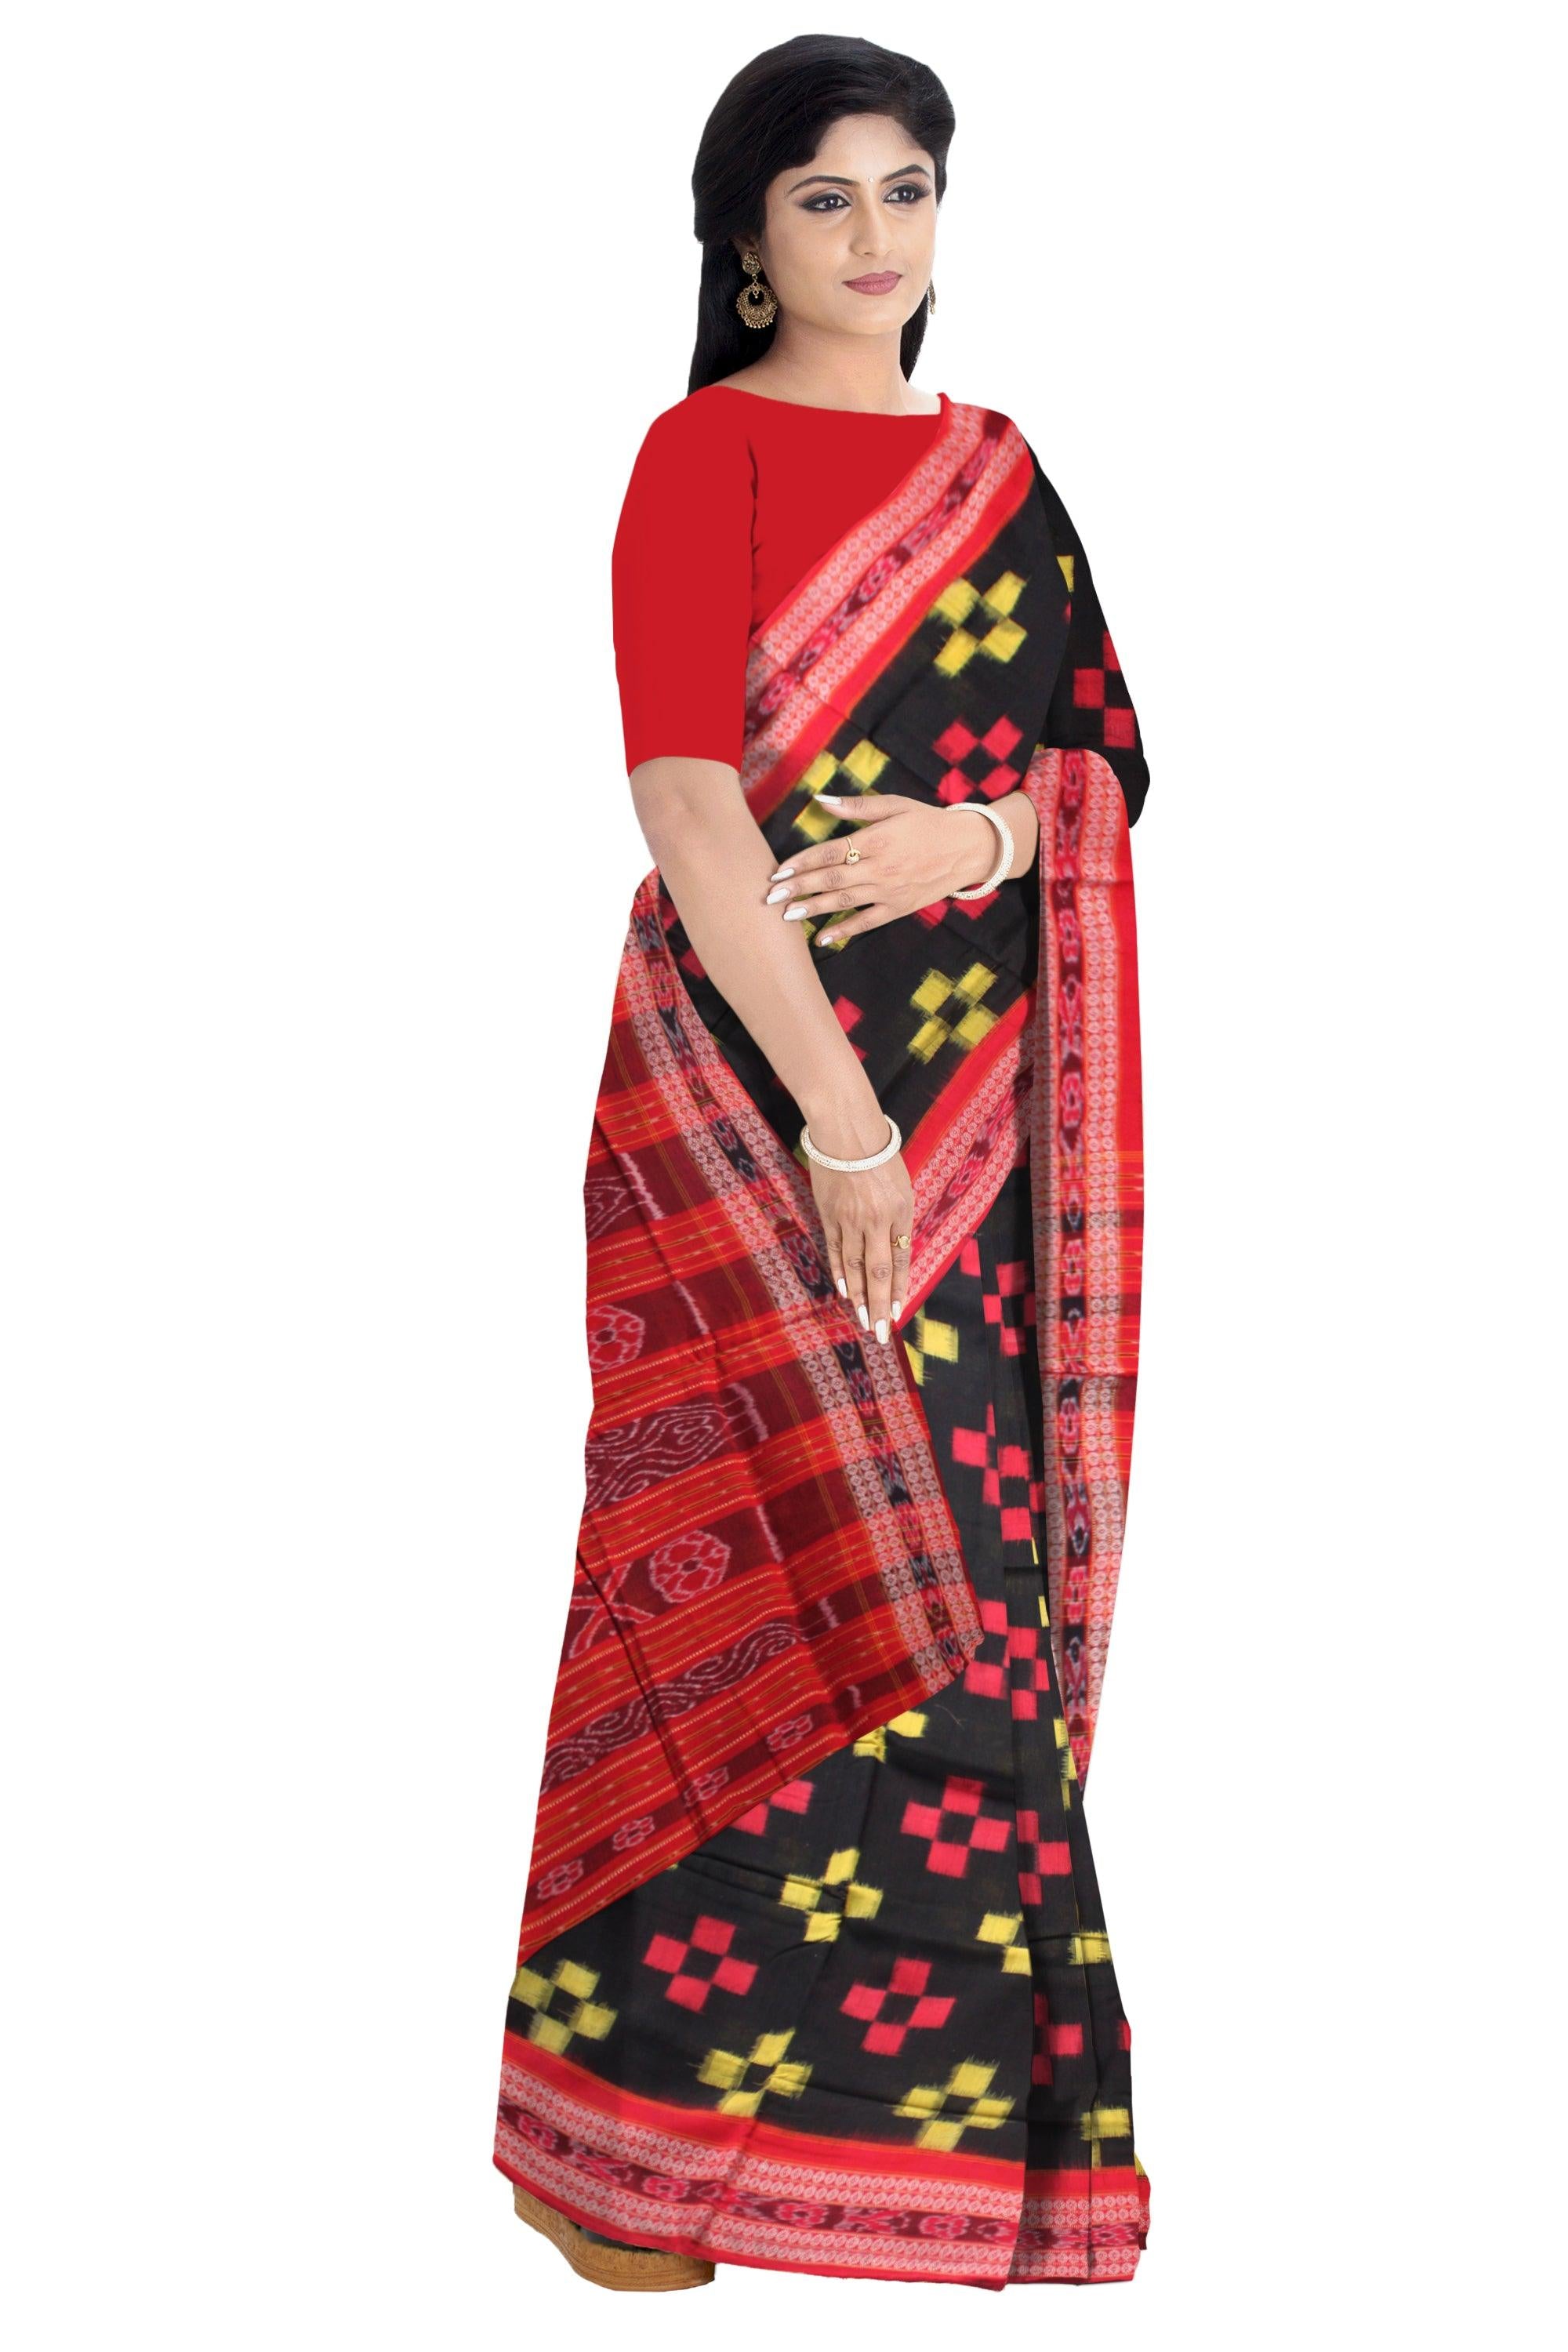 BLACK AND RED COLOR PASAPALI PATTERN COTTON SAREE, WITH  OUT BLOUSE PIECE. - Koshali Arts & Crafts Enterprise